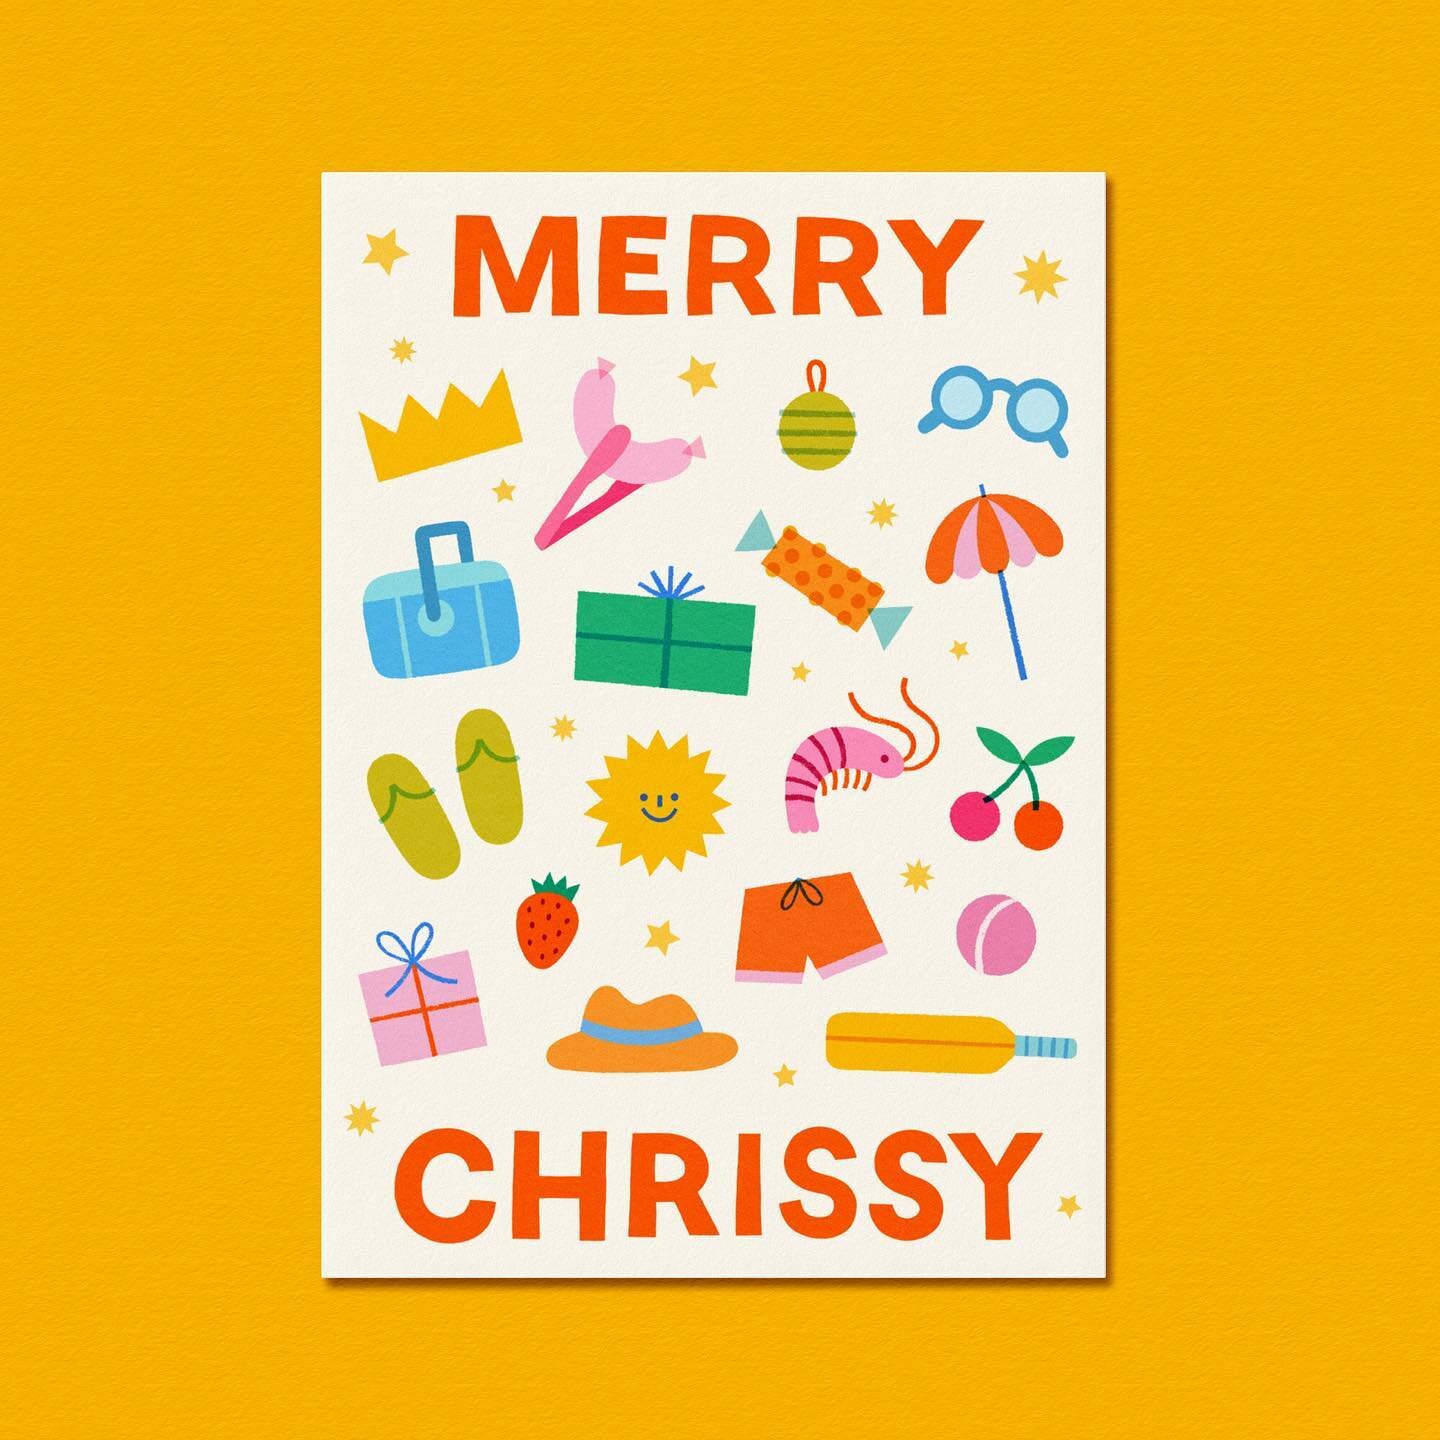 Merry Chrissy design from my range with @moonpig featuring all my fave Aussie Christmas essentials 🦐🏏

#merrychrissy #aussiechristmas #moonpig #greetingcarddesign #greetingcardsofinstagram #illustrationartists #christmasillustration #illustratorson